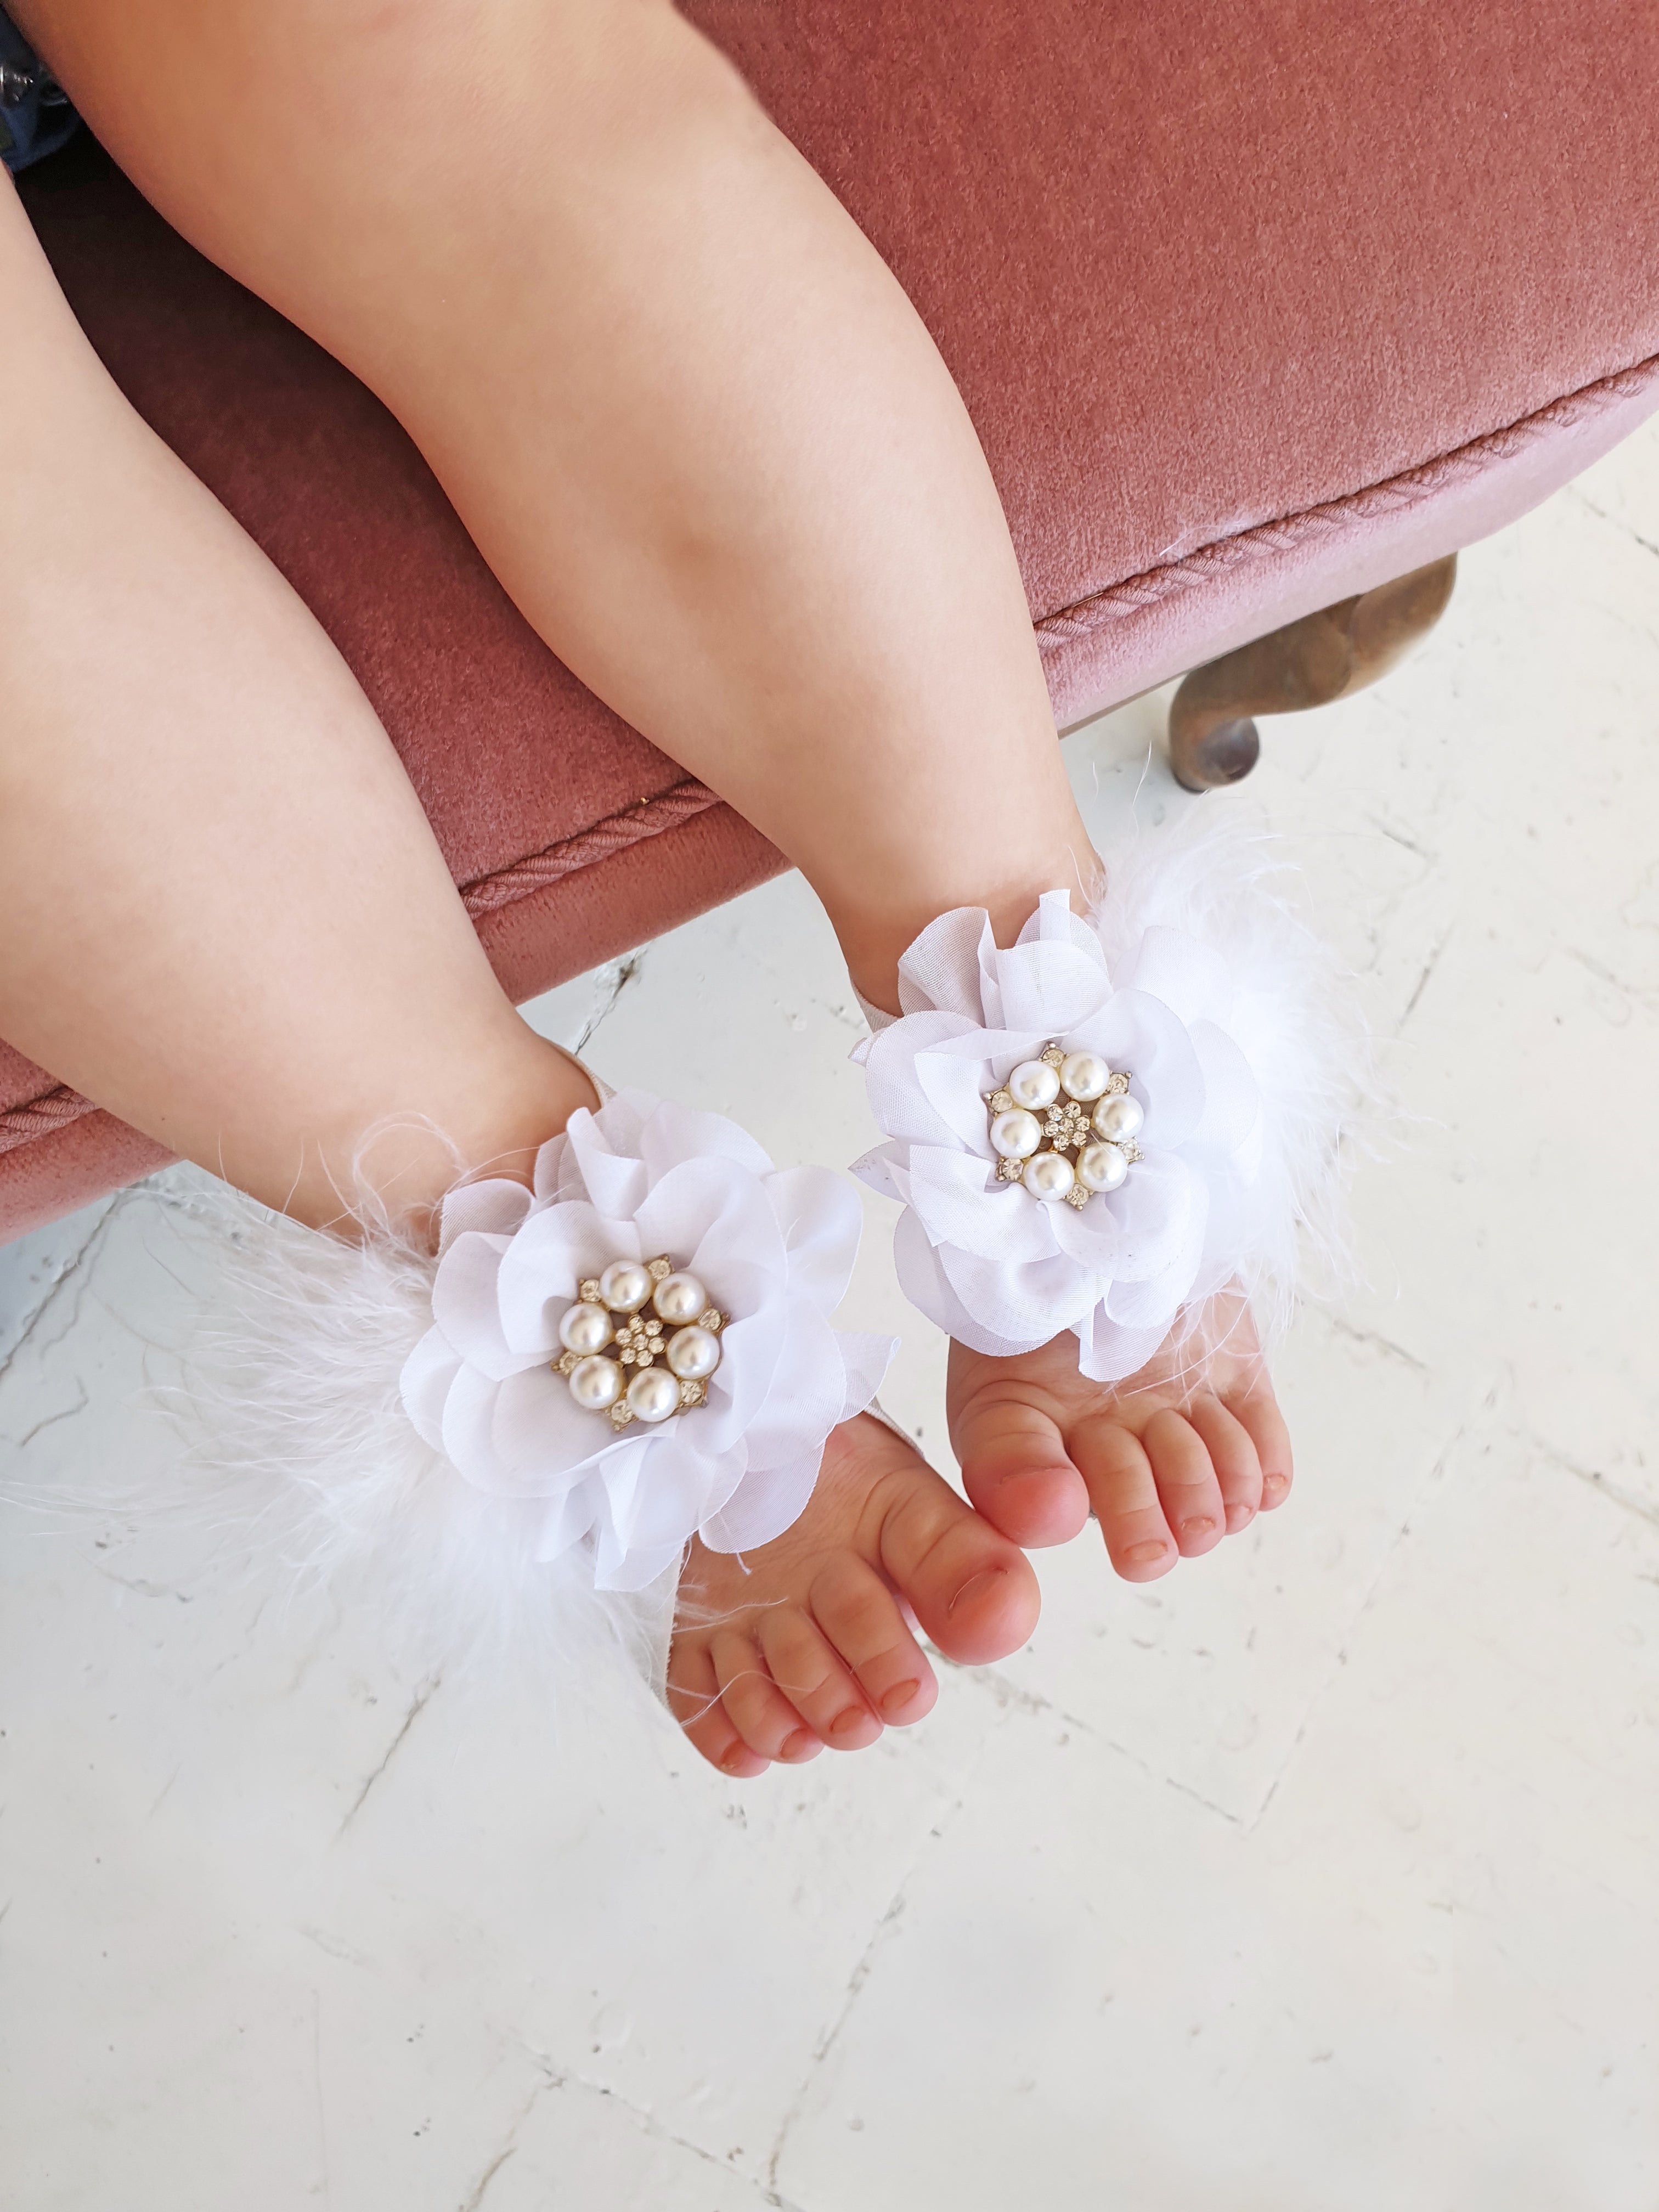 Baby anklets, Toddler and Children's anklets - buy online and be different